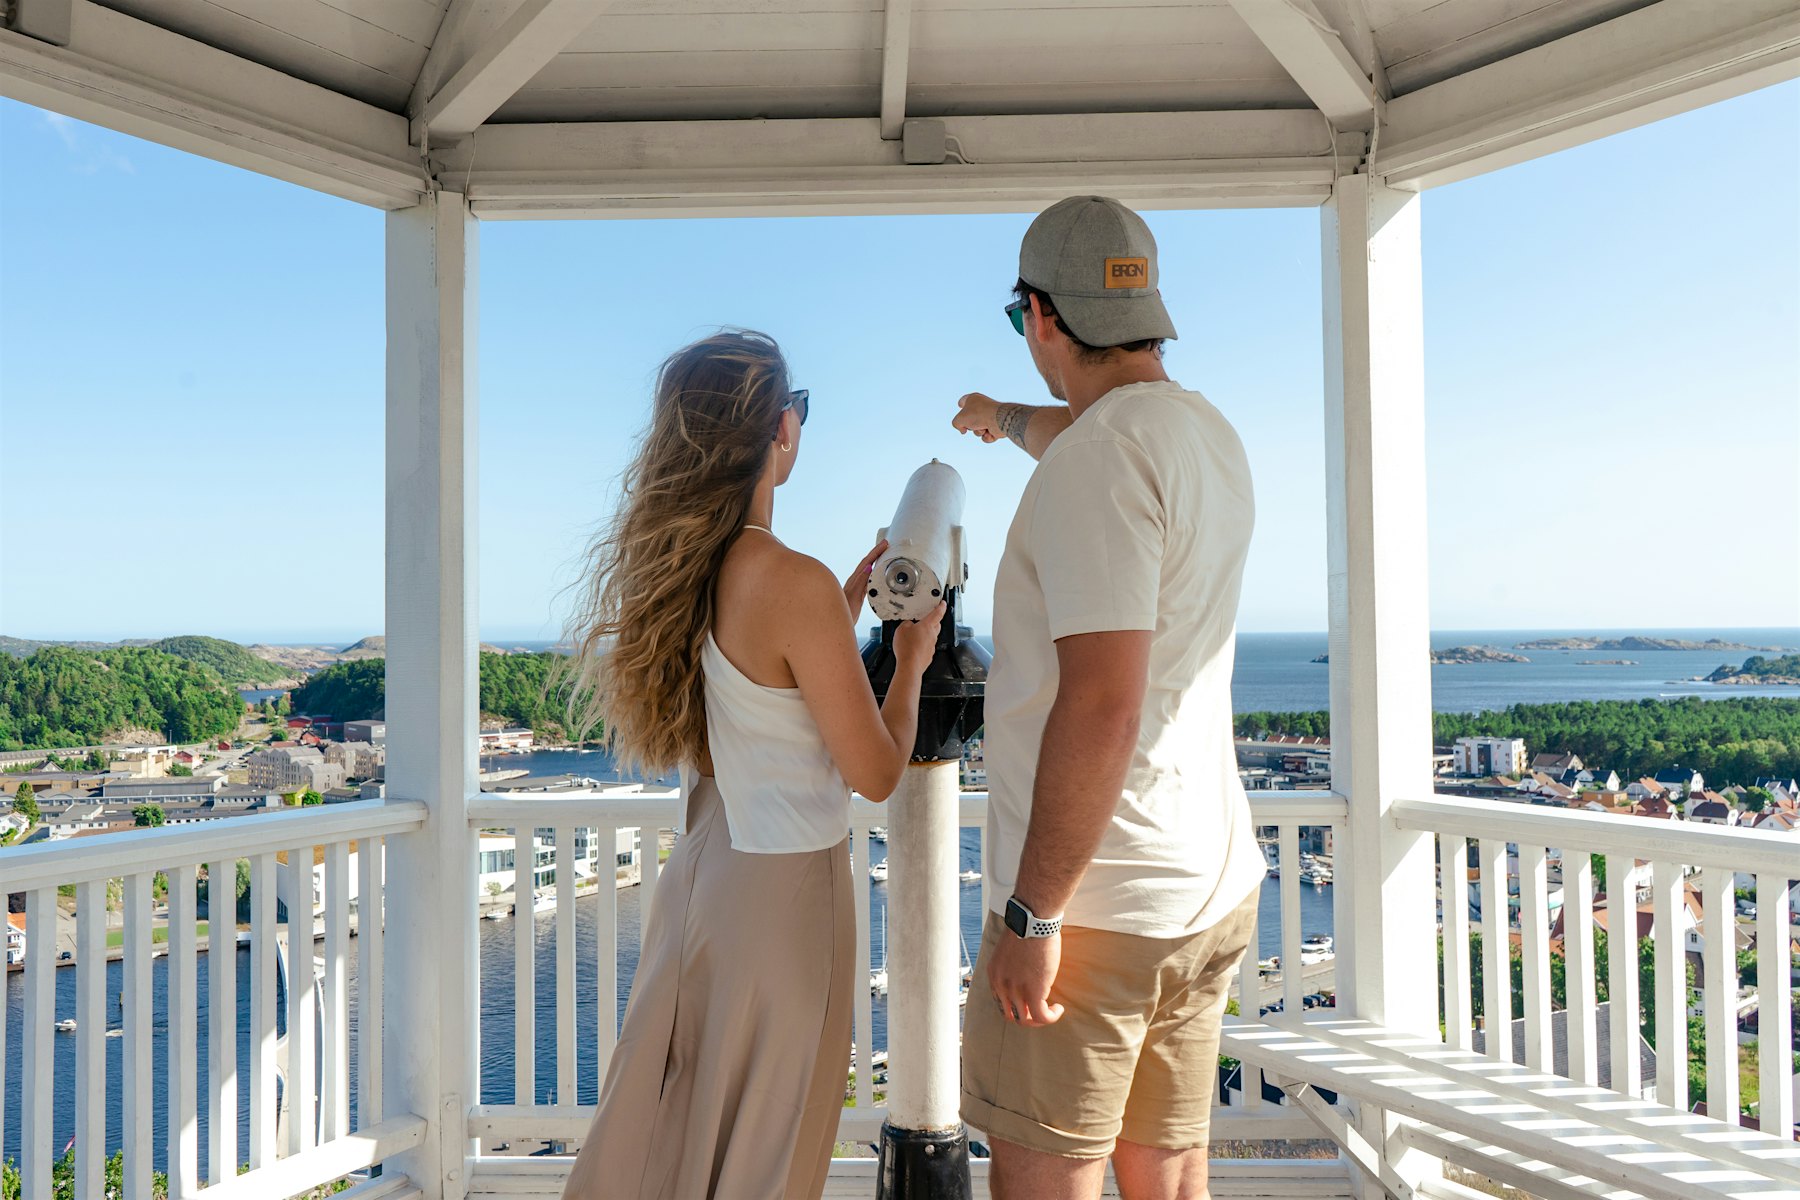 A girl and a boy stand by a pair of binoculars in a telescope house and look out over the horizon into the sea. Photo